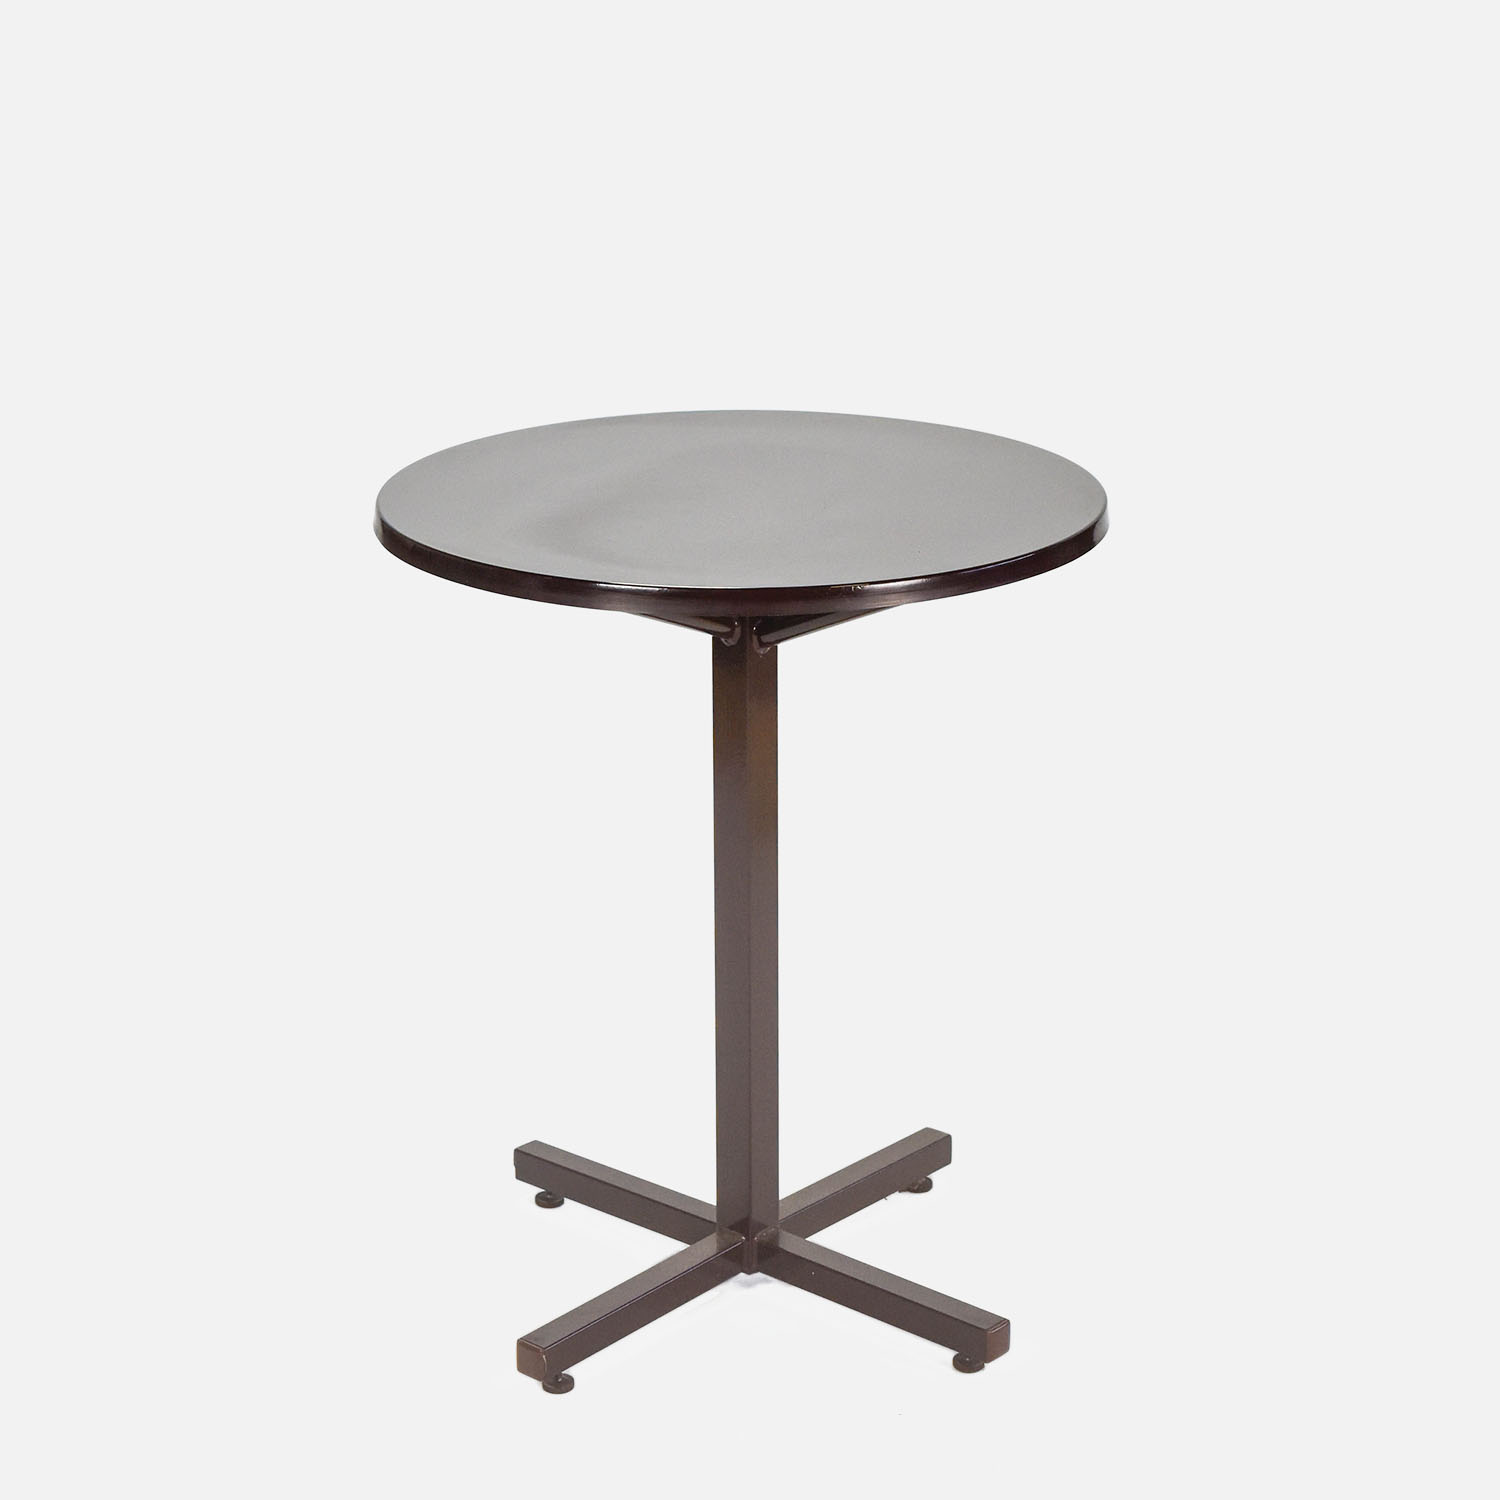 Tall Danish Modern Cafe Round Metal and Wood Bar Table